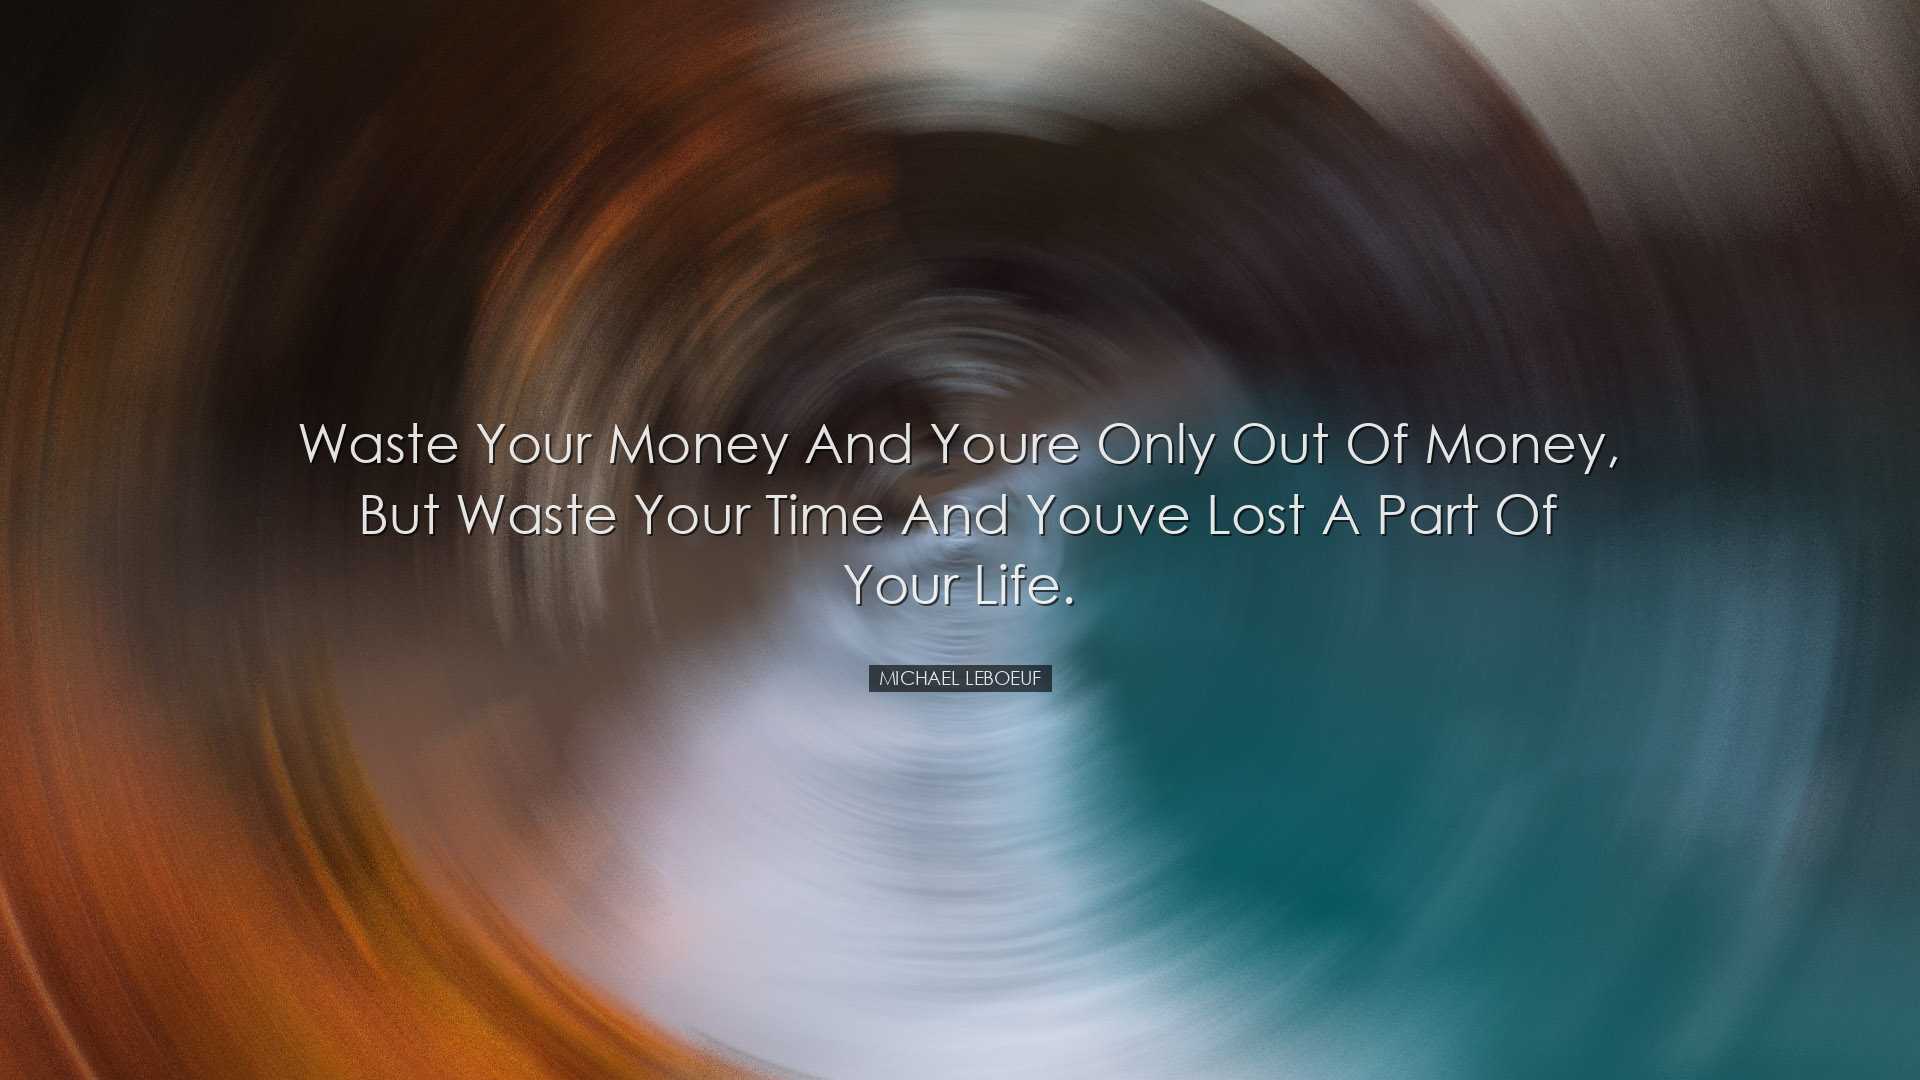 Waste your money and youre only out of money, but waste your time